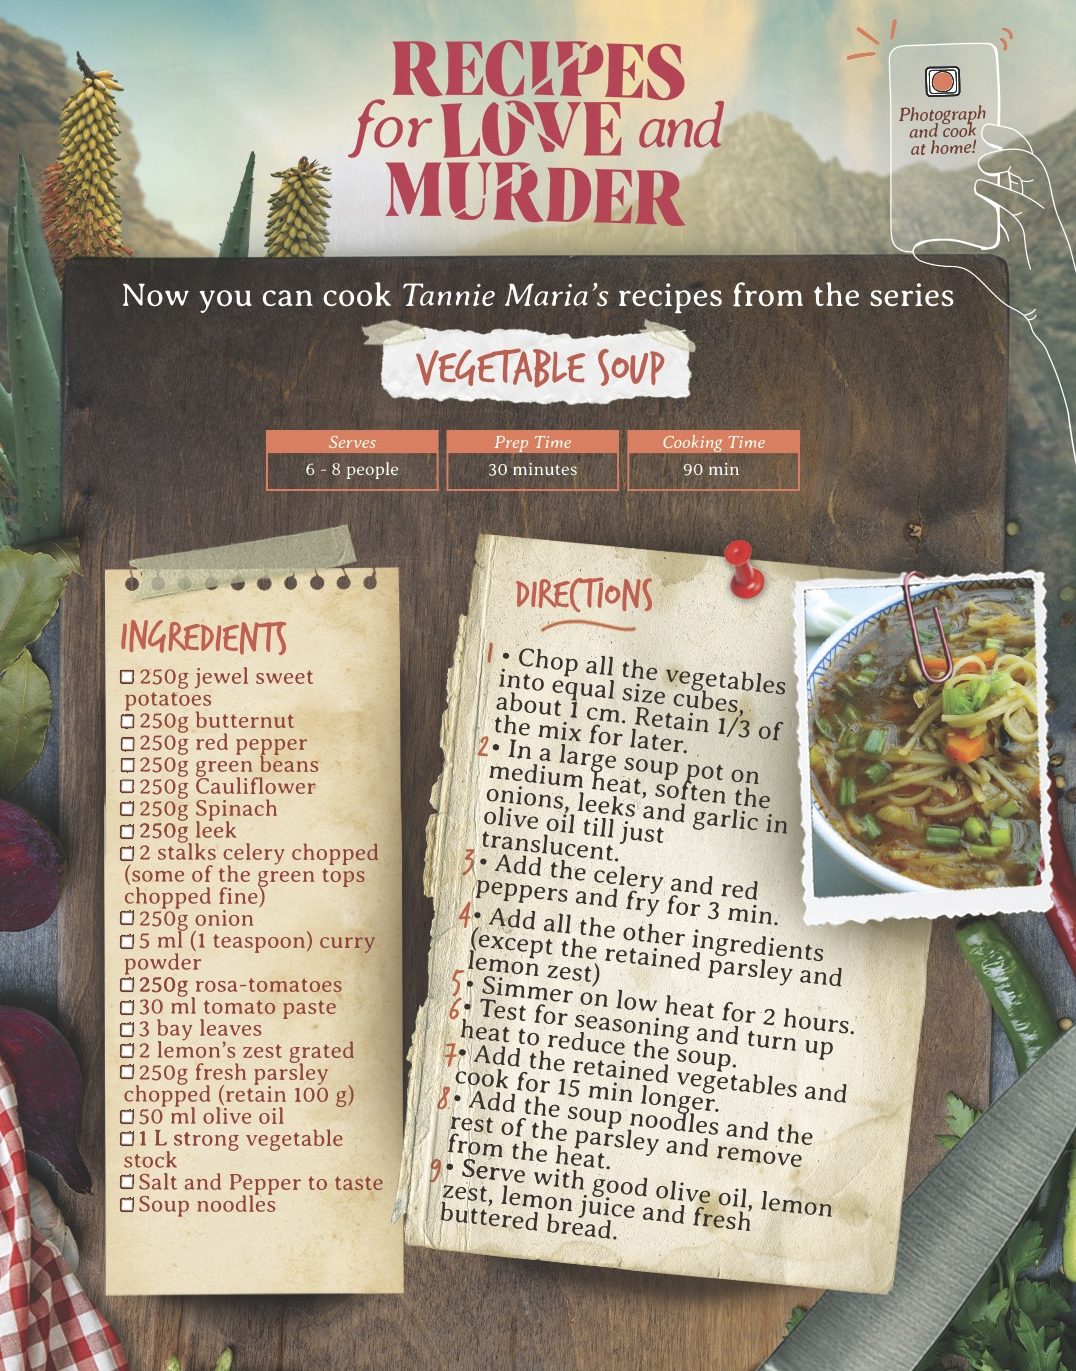 Recipes' Serves Up a Quirky, South African Murder Mystery